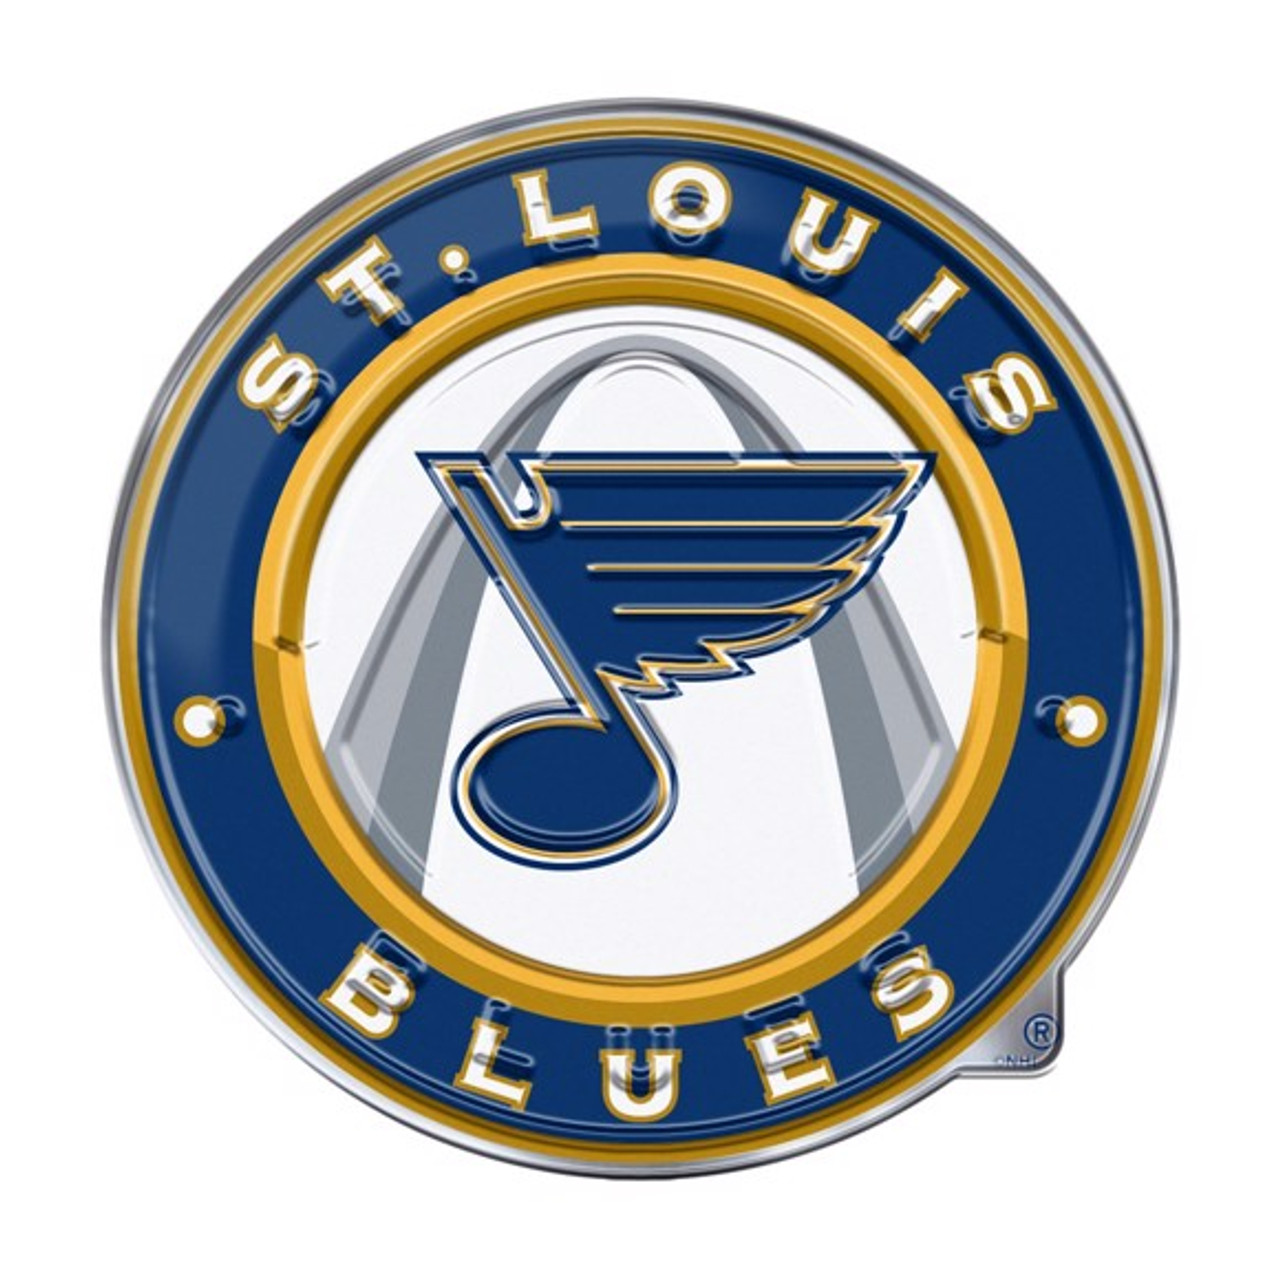 St. Louis Blues Embroidered Patch Logo, NHL Team Emblem, 7 types and sizes